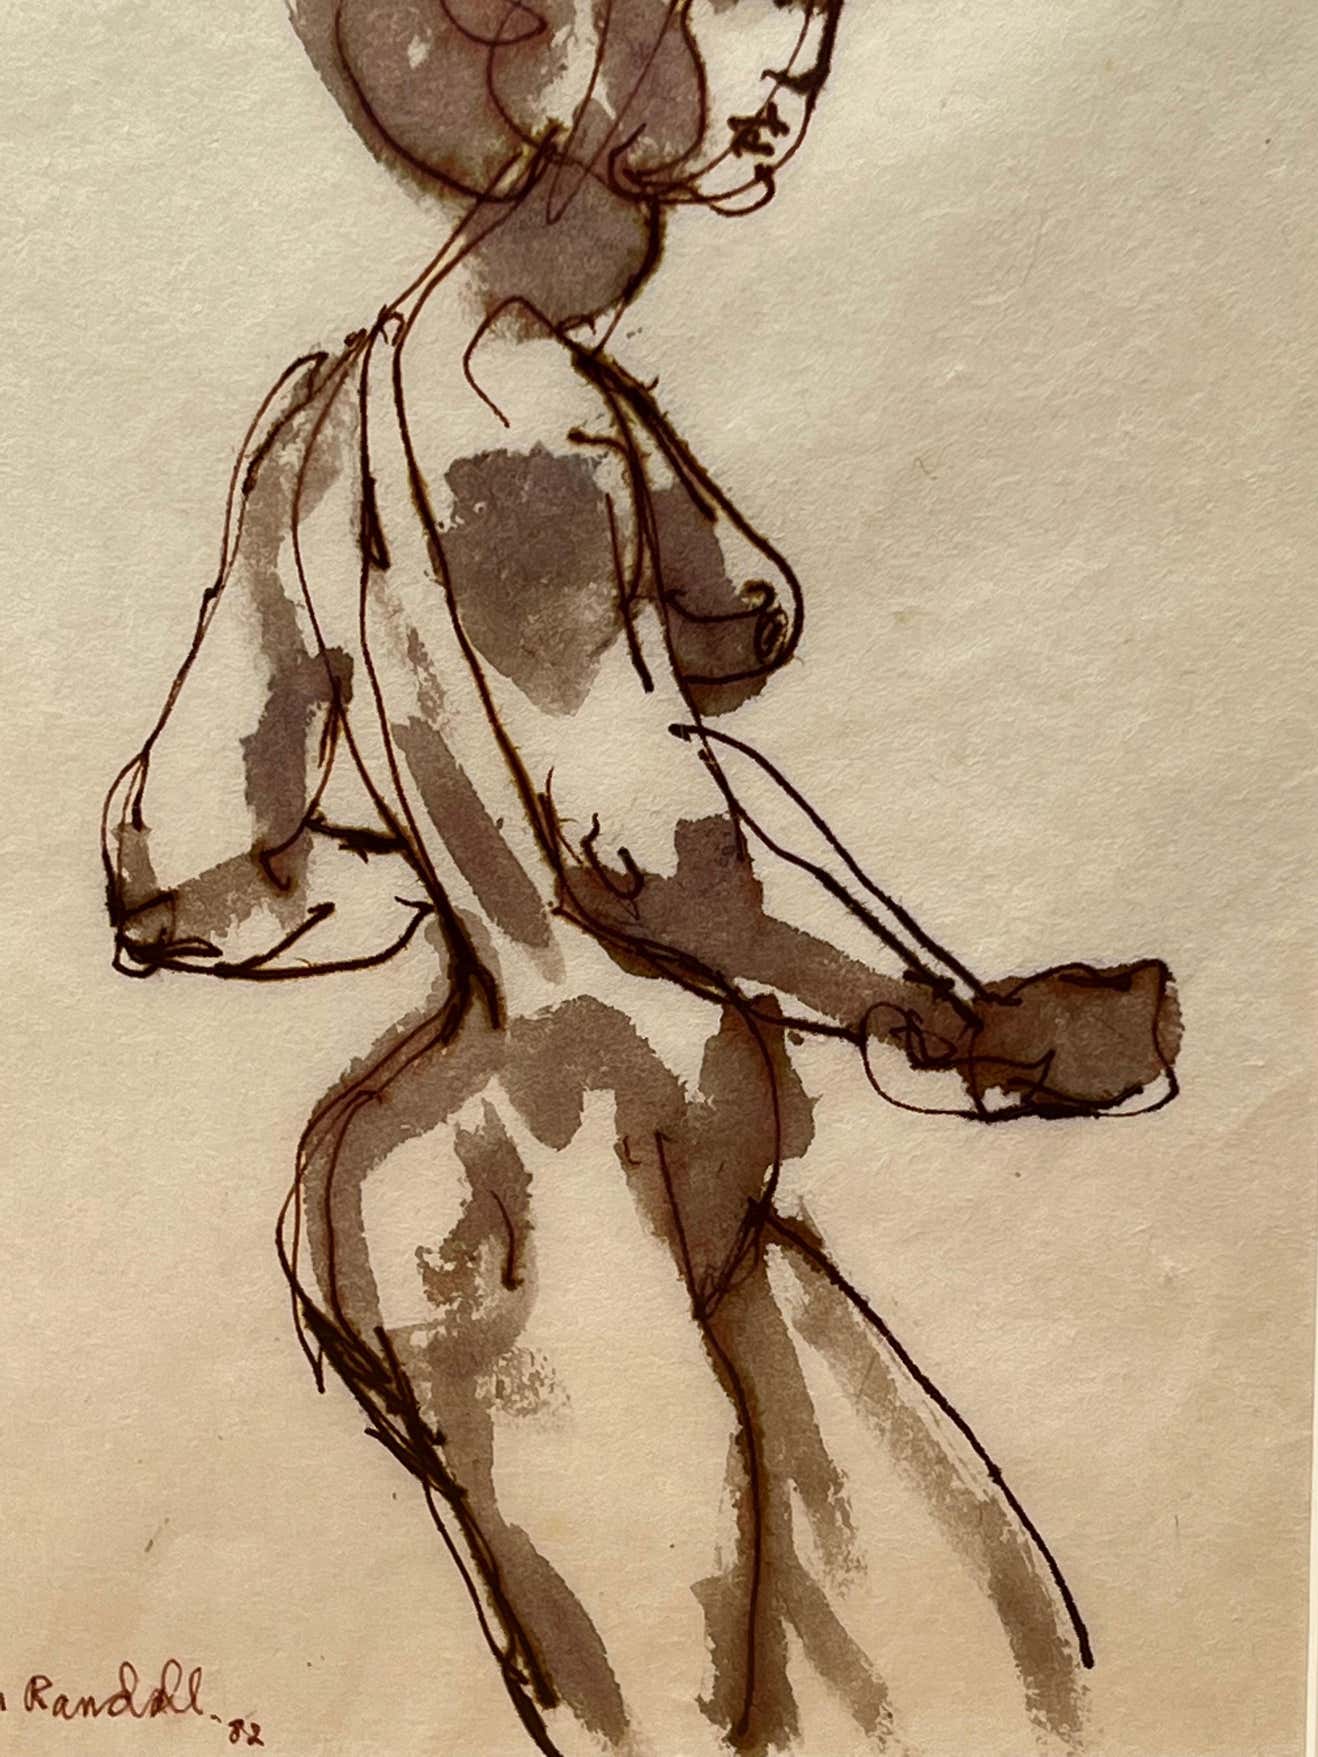 Watercolor Nudes by Byron Randall - A Pair